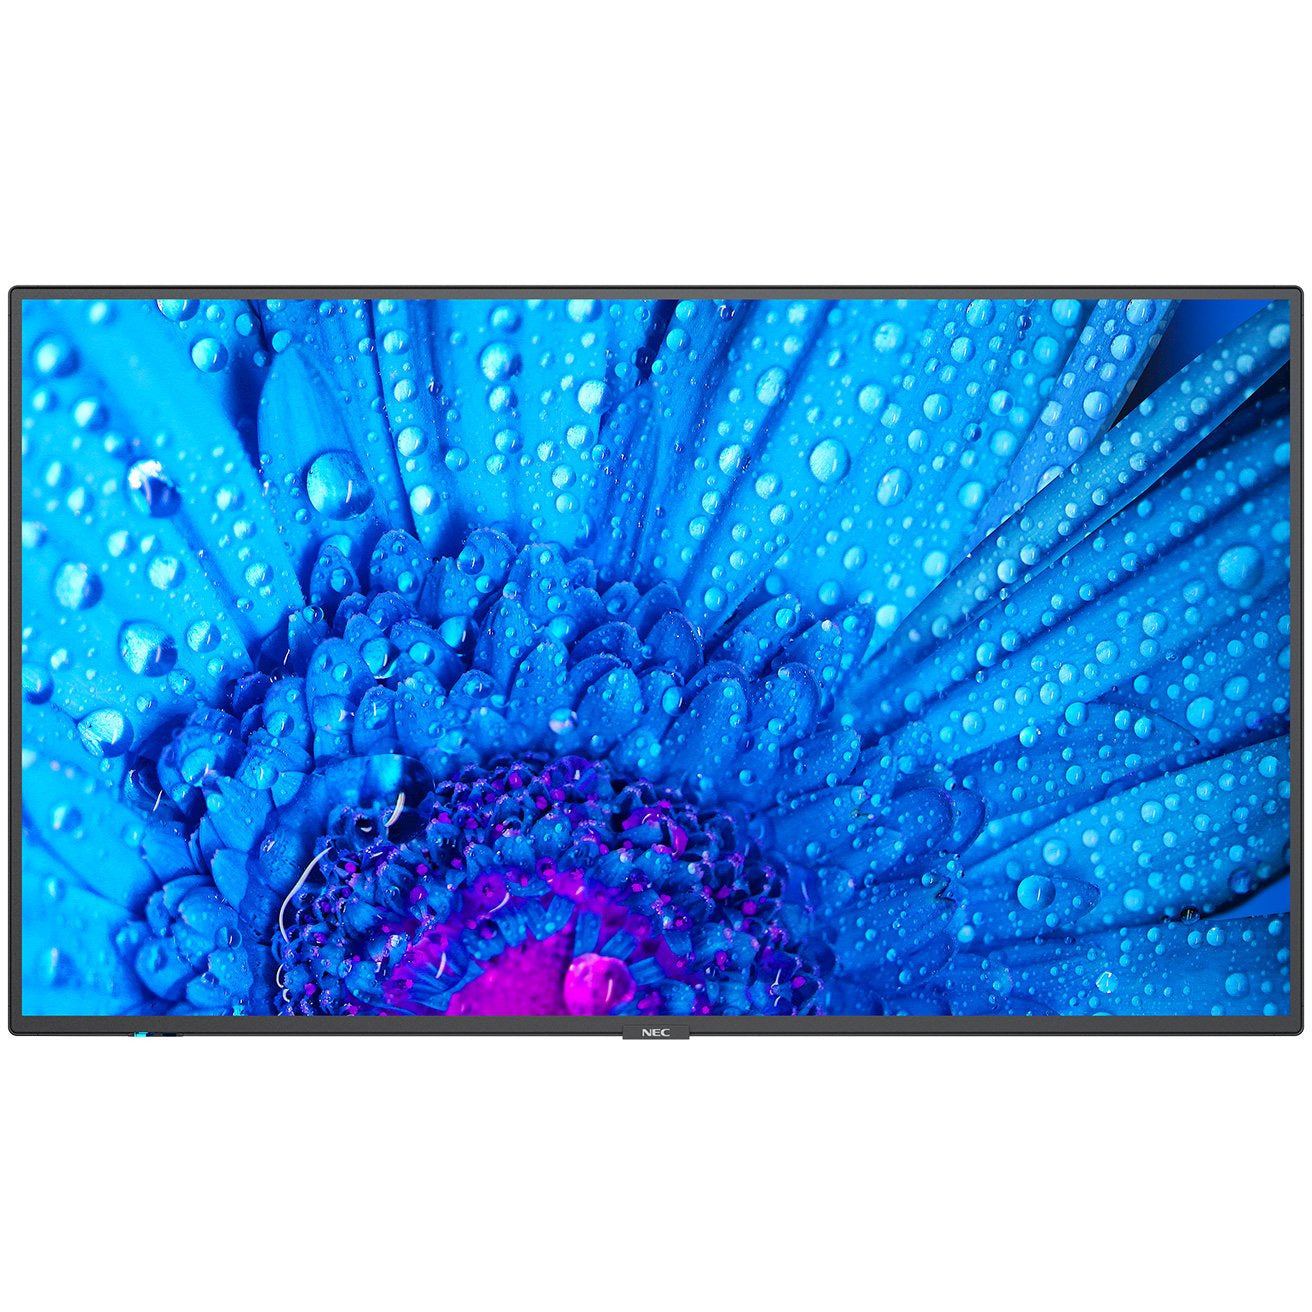 NEC MultiSync® M751 LCD 75" Message Large Format Display